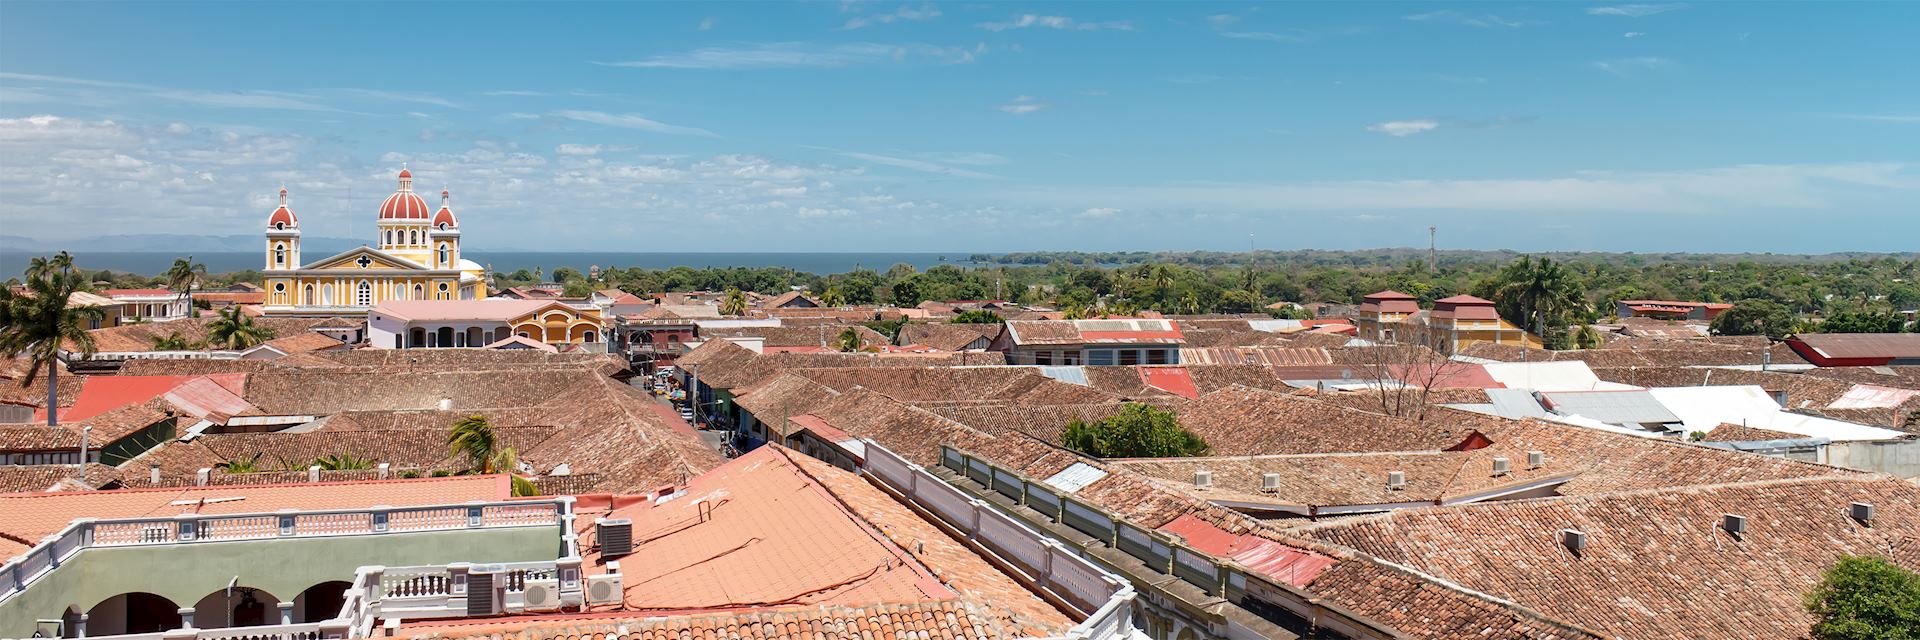 Granada Cathedral and rooftops, Nicaragua